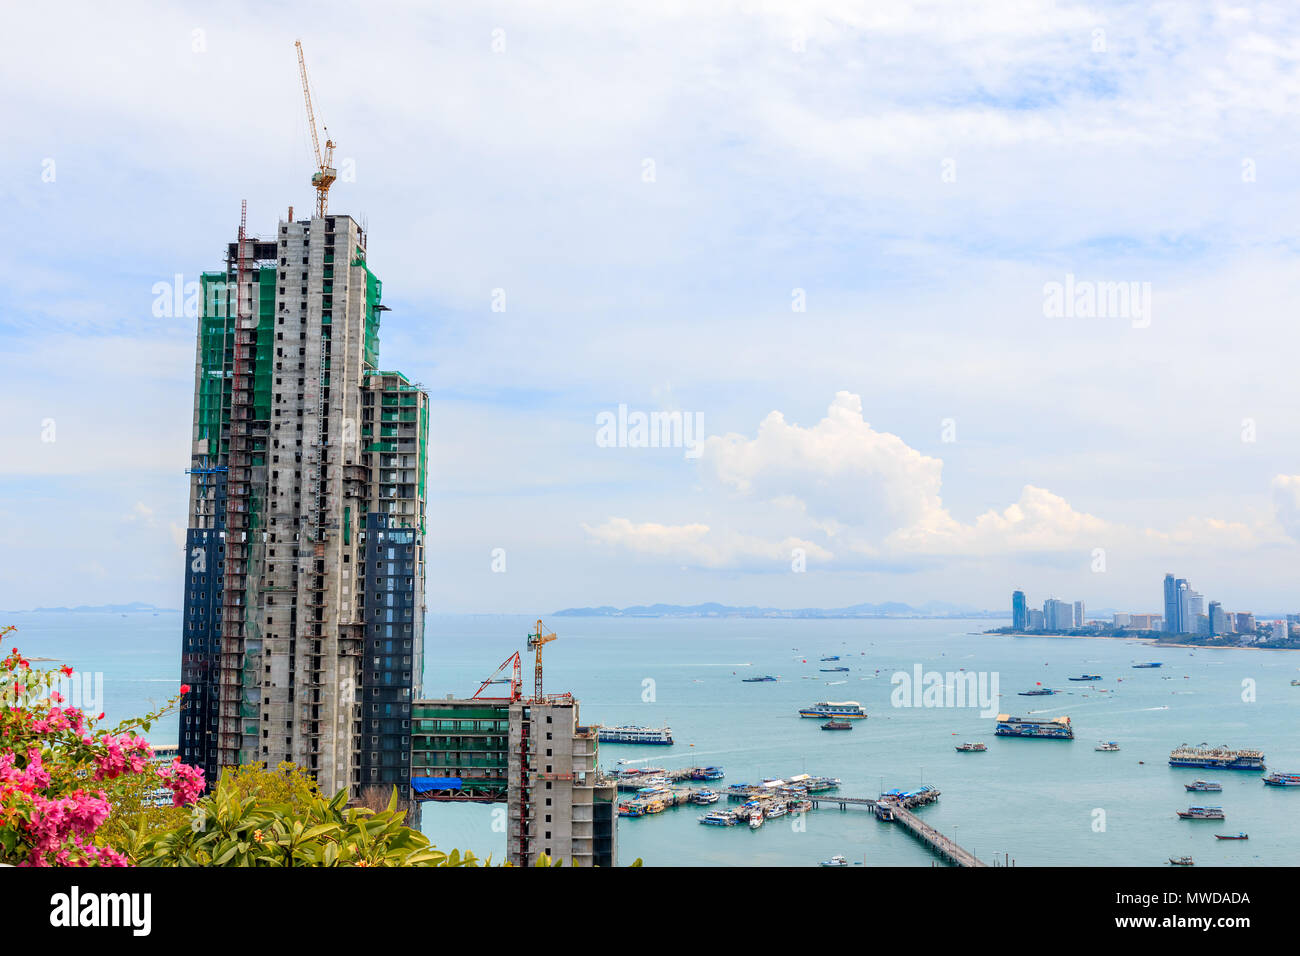 PATTAYA - AUGUST 23, 2014: The new building site name is "Water Front Suites &a mp ; Residence Pattaya" , Building Obscured the view Pratamnak Hill. A Stock Photo